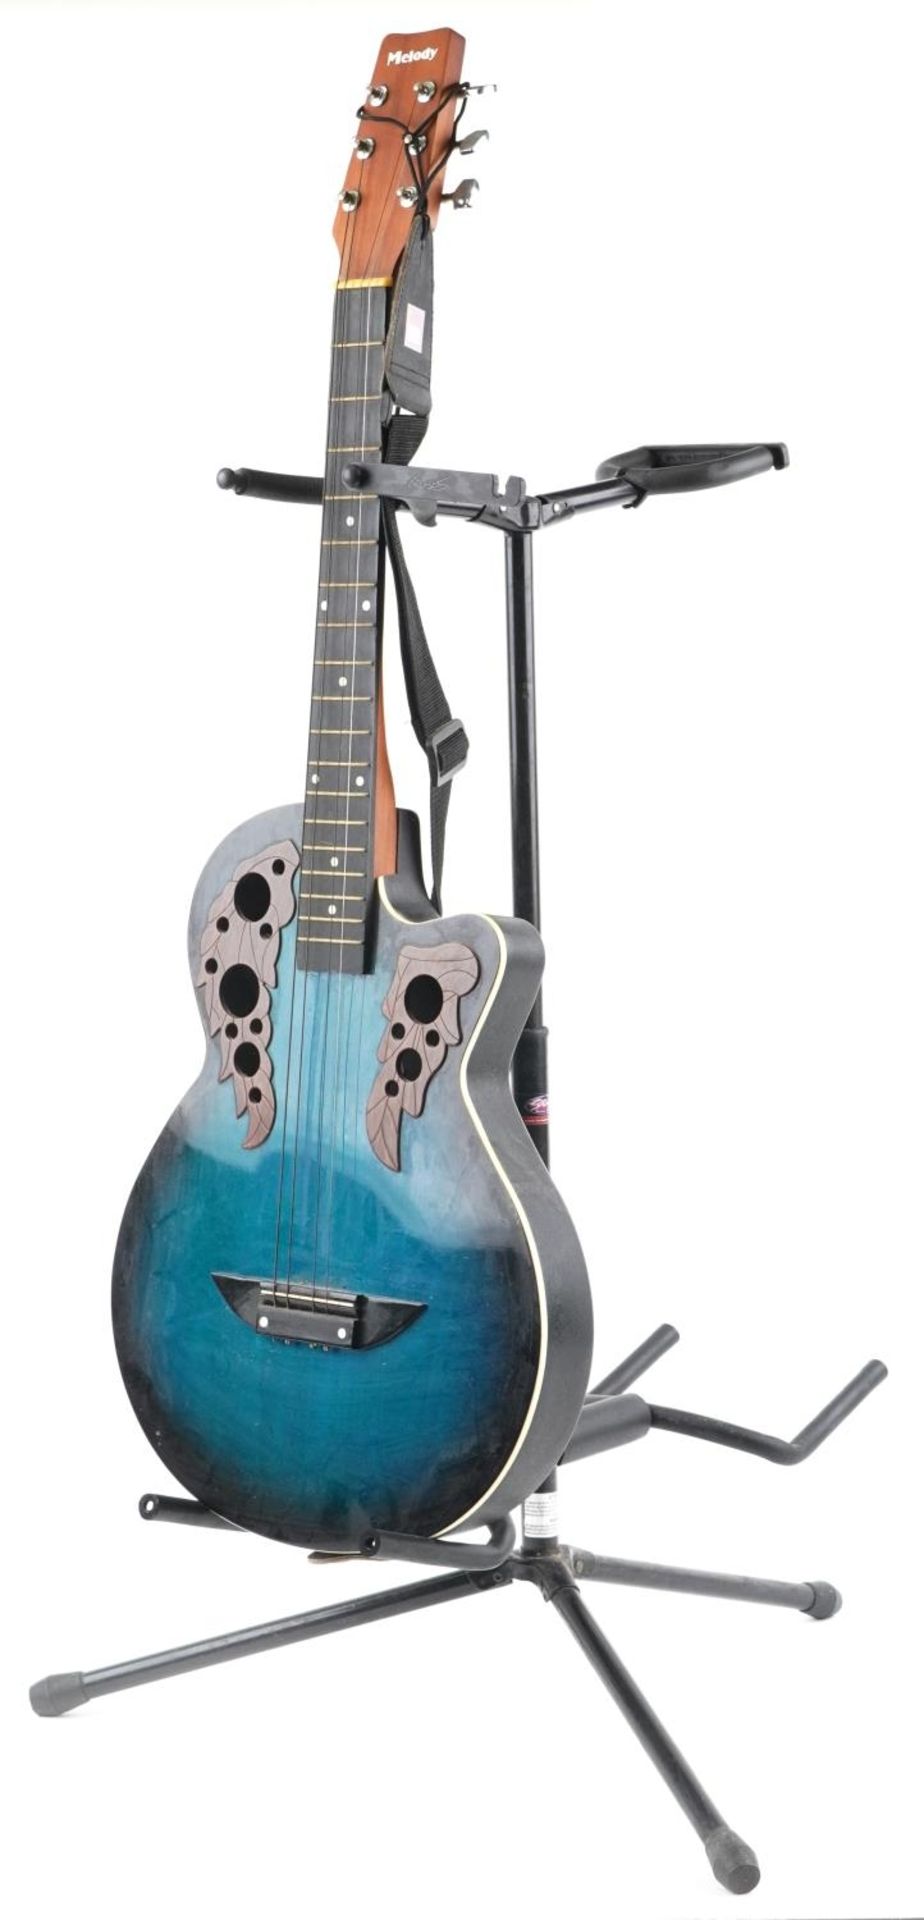 Melody six string acoustic guitar with Stagg guitar stand, the guitar 96cm in length - Bild 2 aus 6